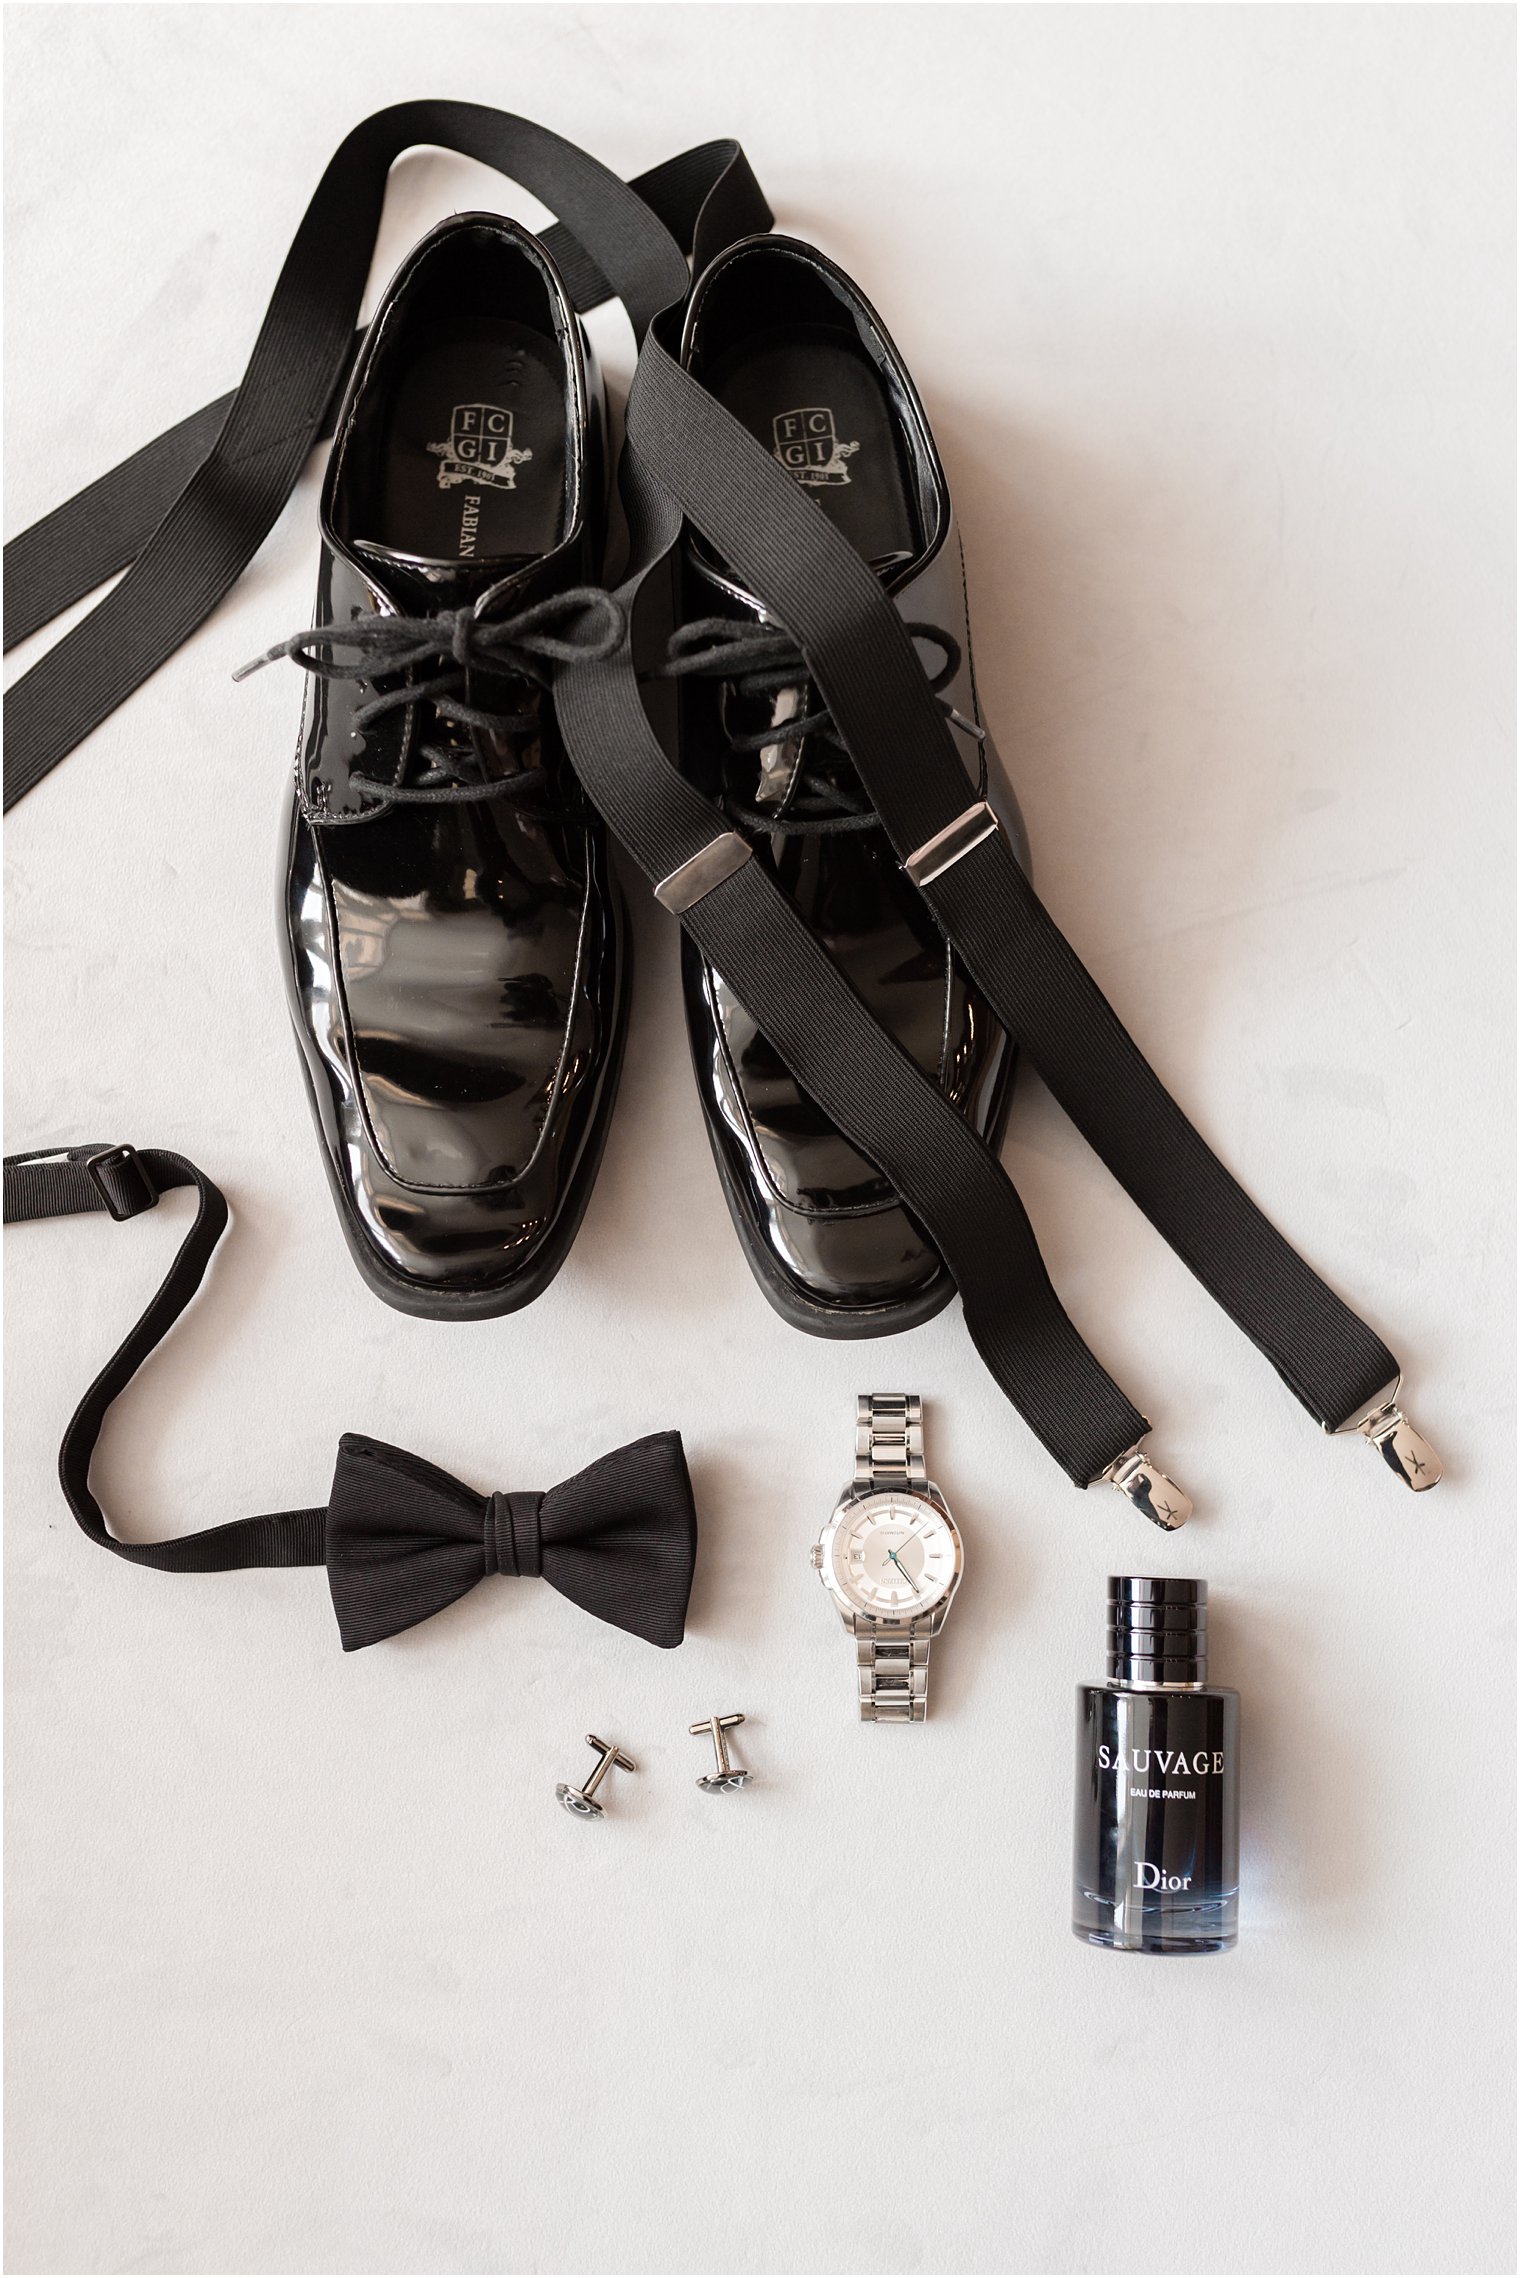 groom's black shoes and bowtie for timeless wedding at the Molly Pitcher Inn